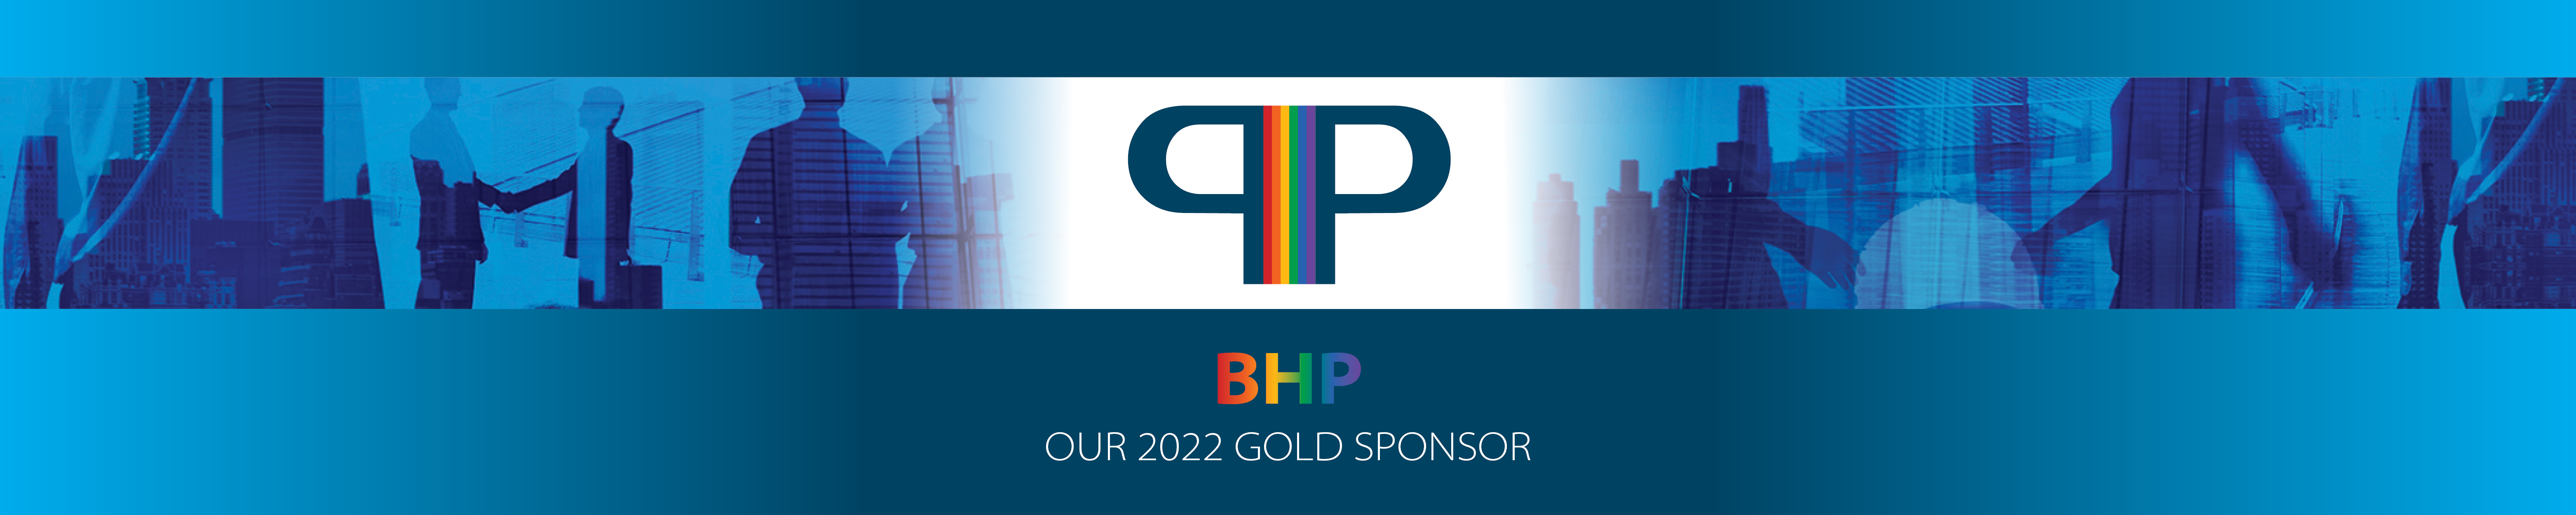 PIP_Conference_Sponsor_BHP